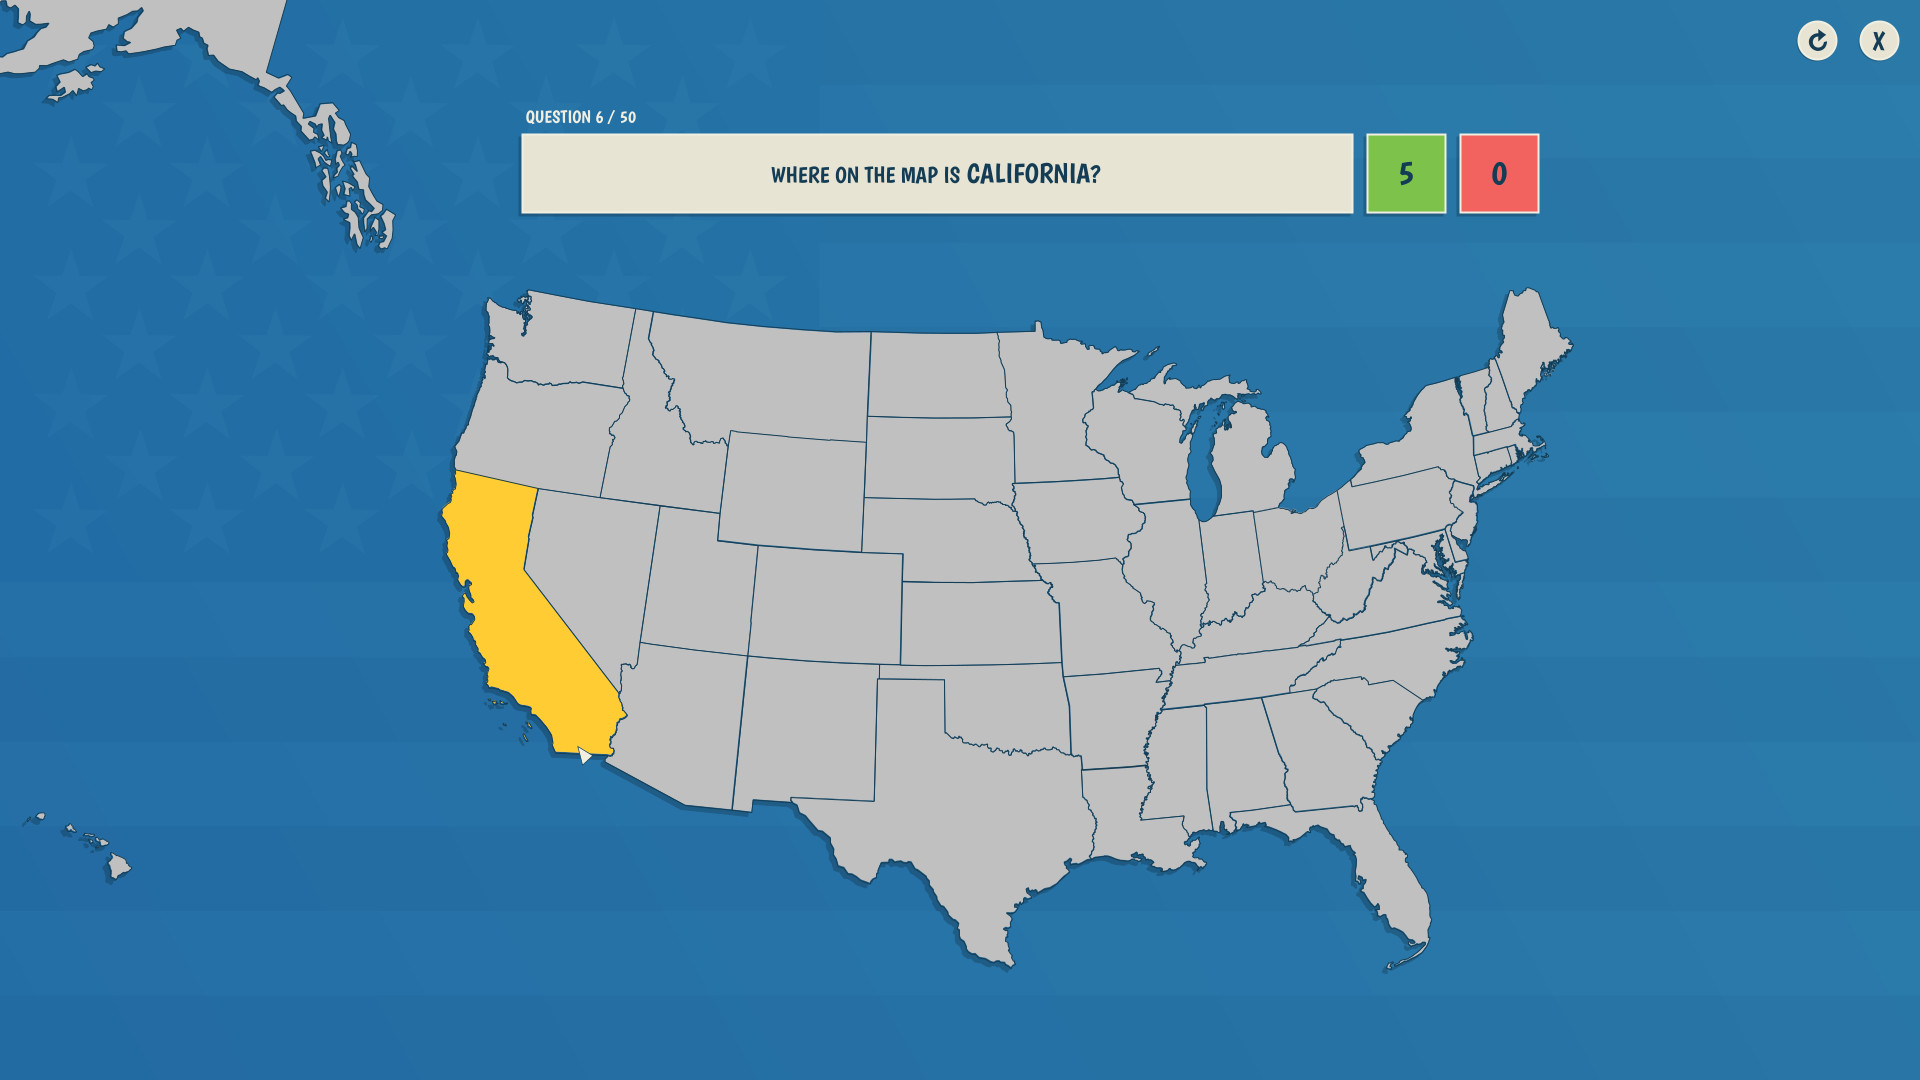 USA 50 States game. Us States Quiz. USA Map Quiz game. California on the Map of the USA. State quiz